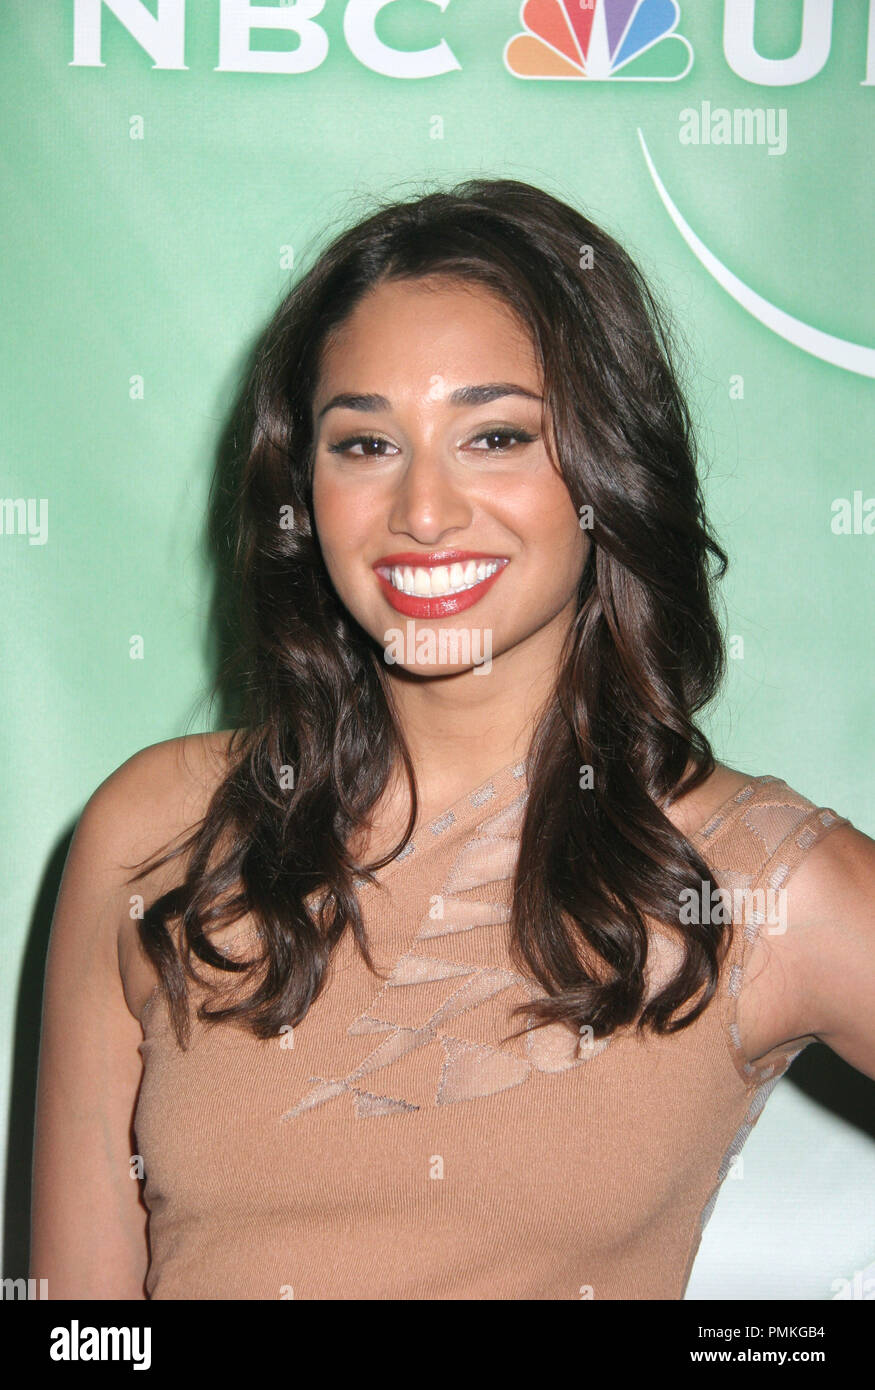 Meaghan rath images